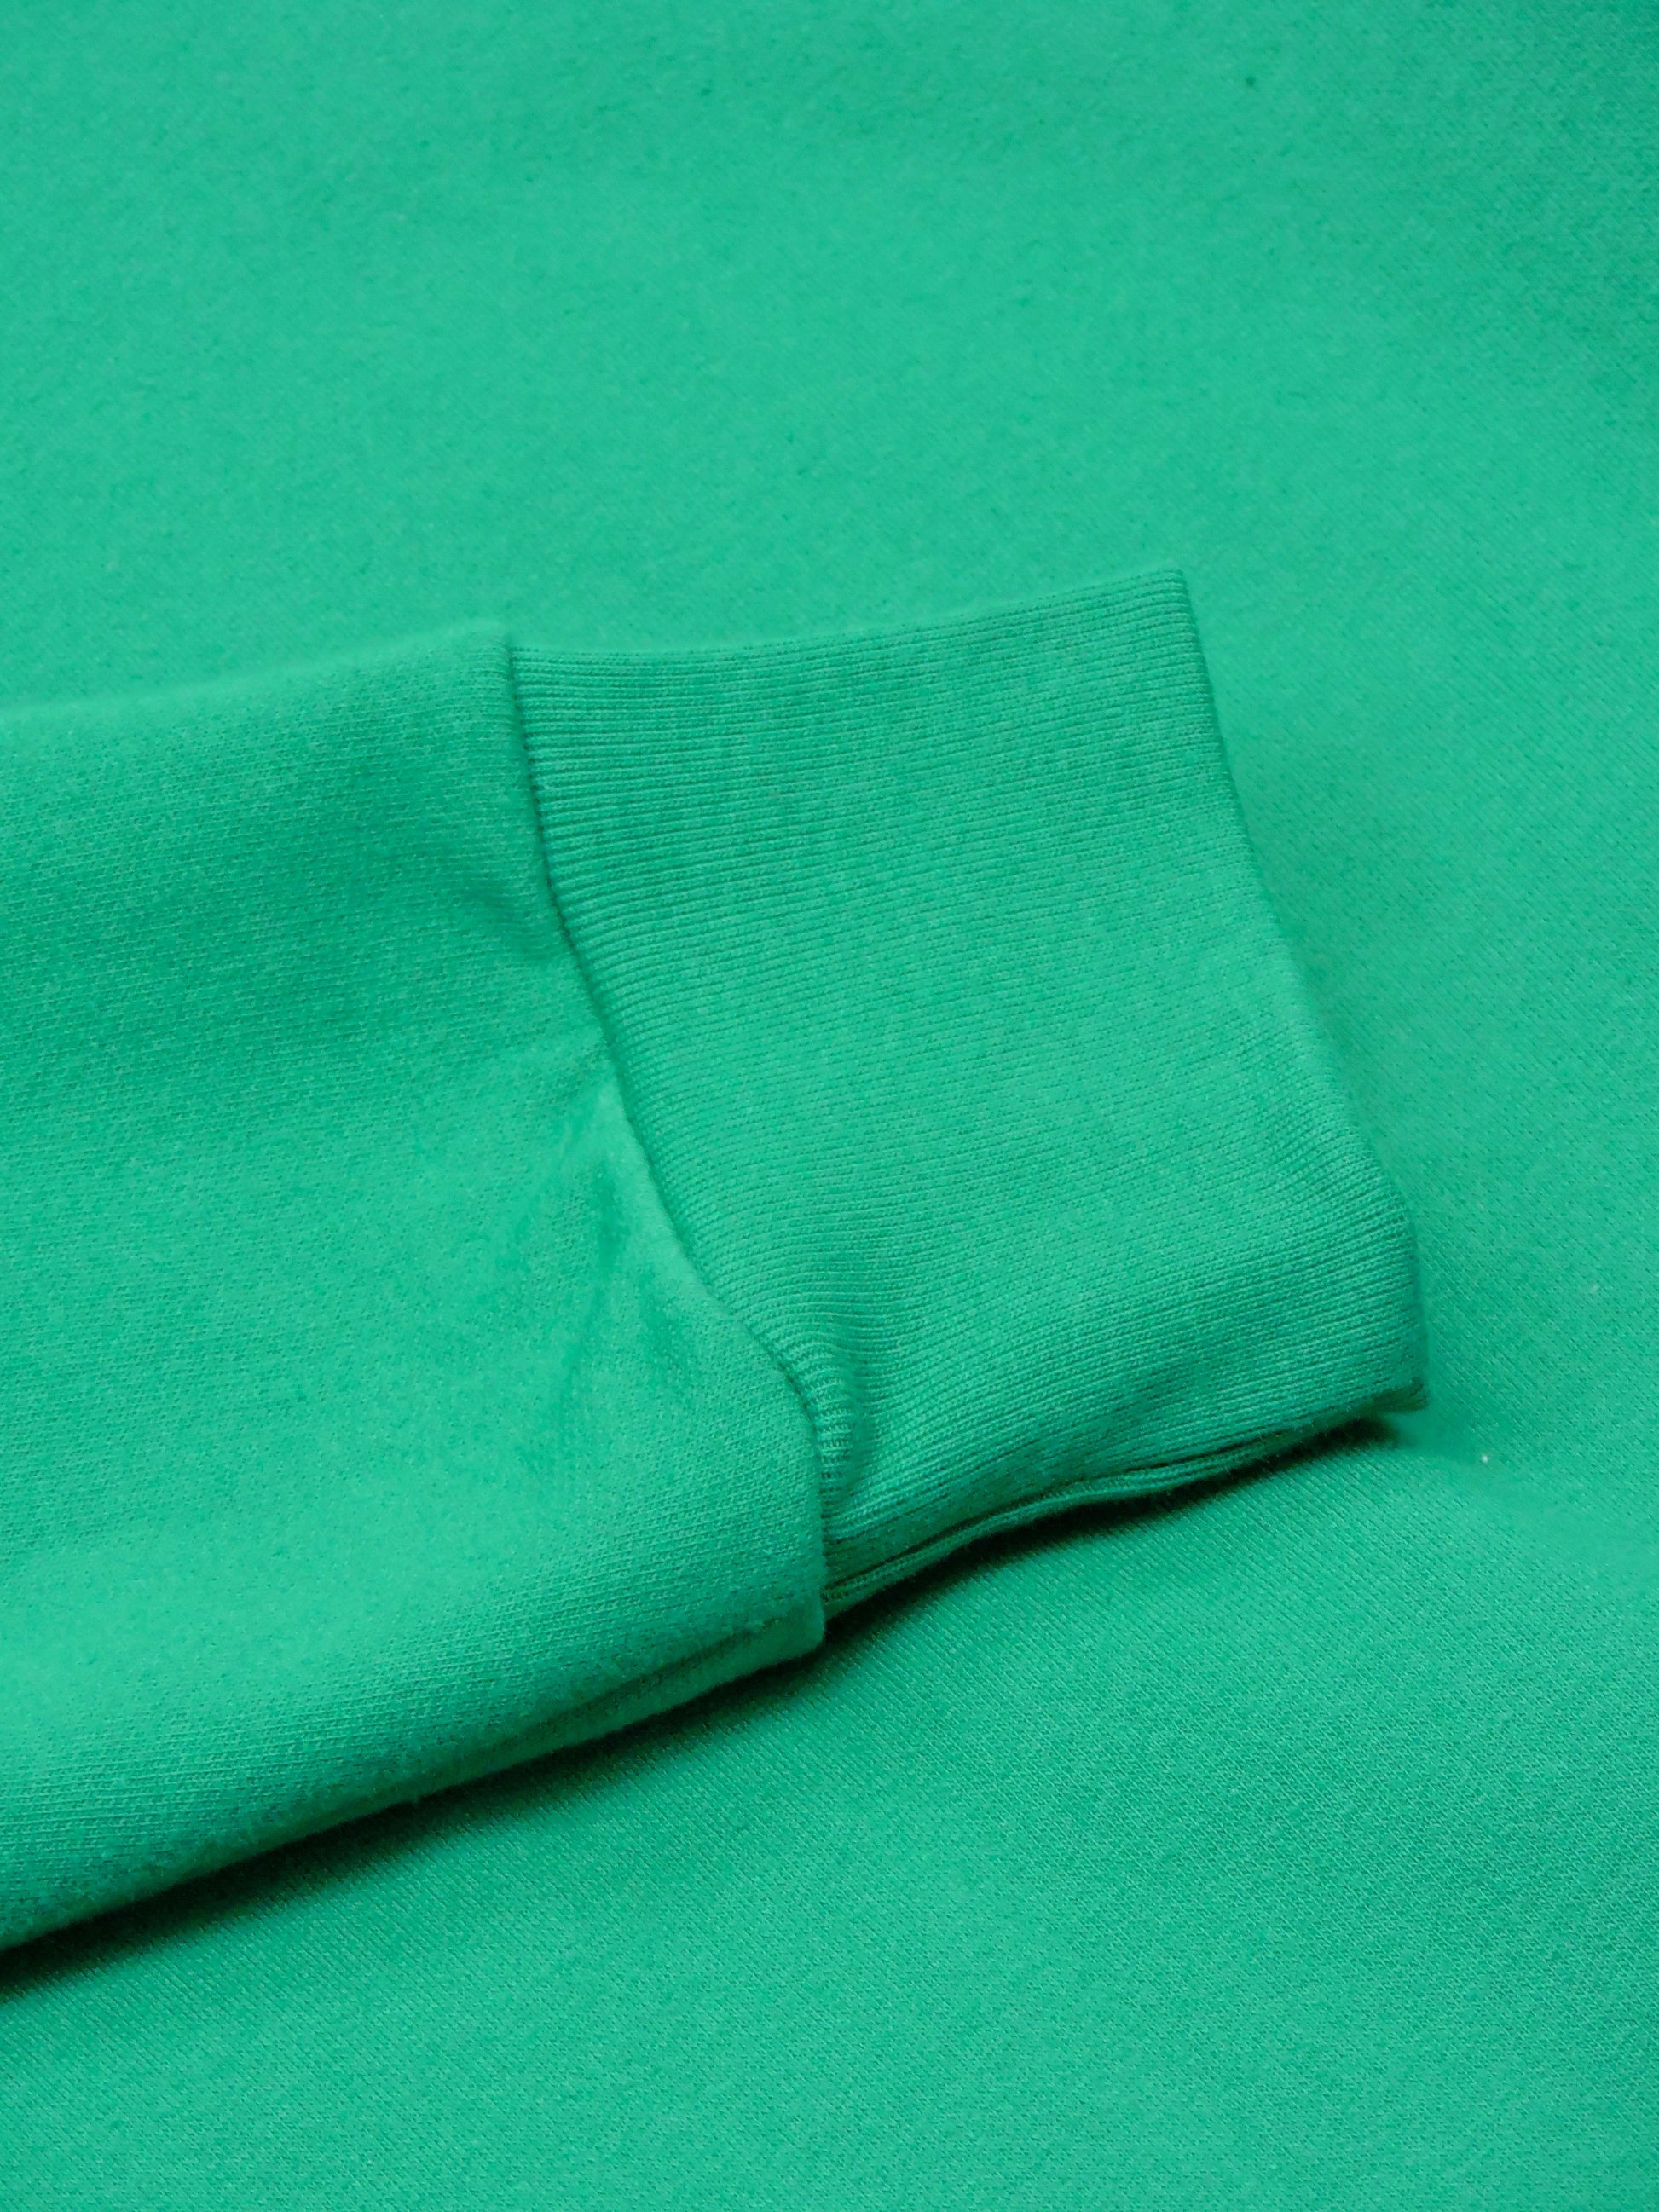 Close up of Emerald Green Crewneck's Fitted Cuffs